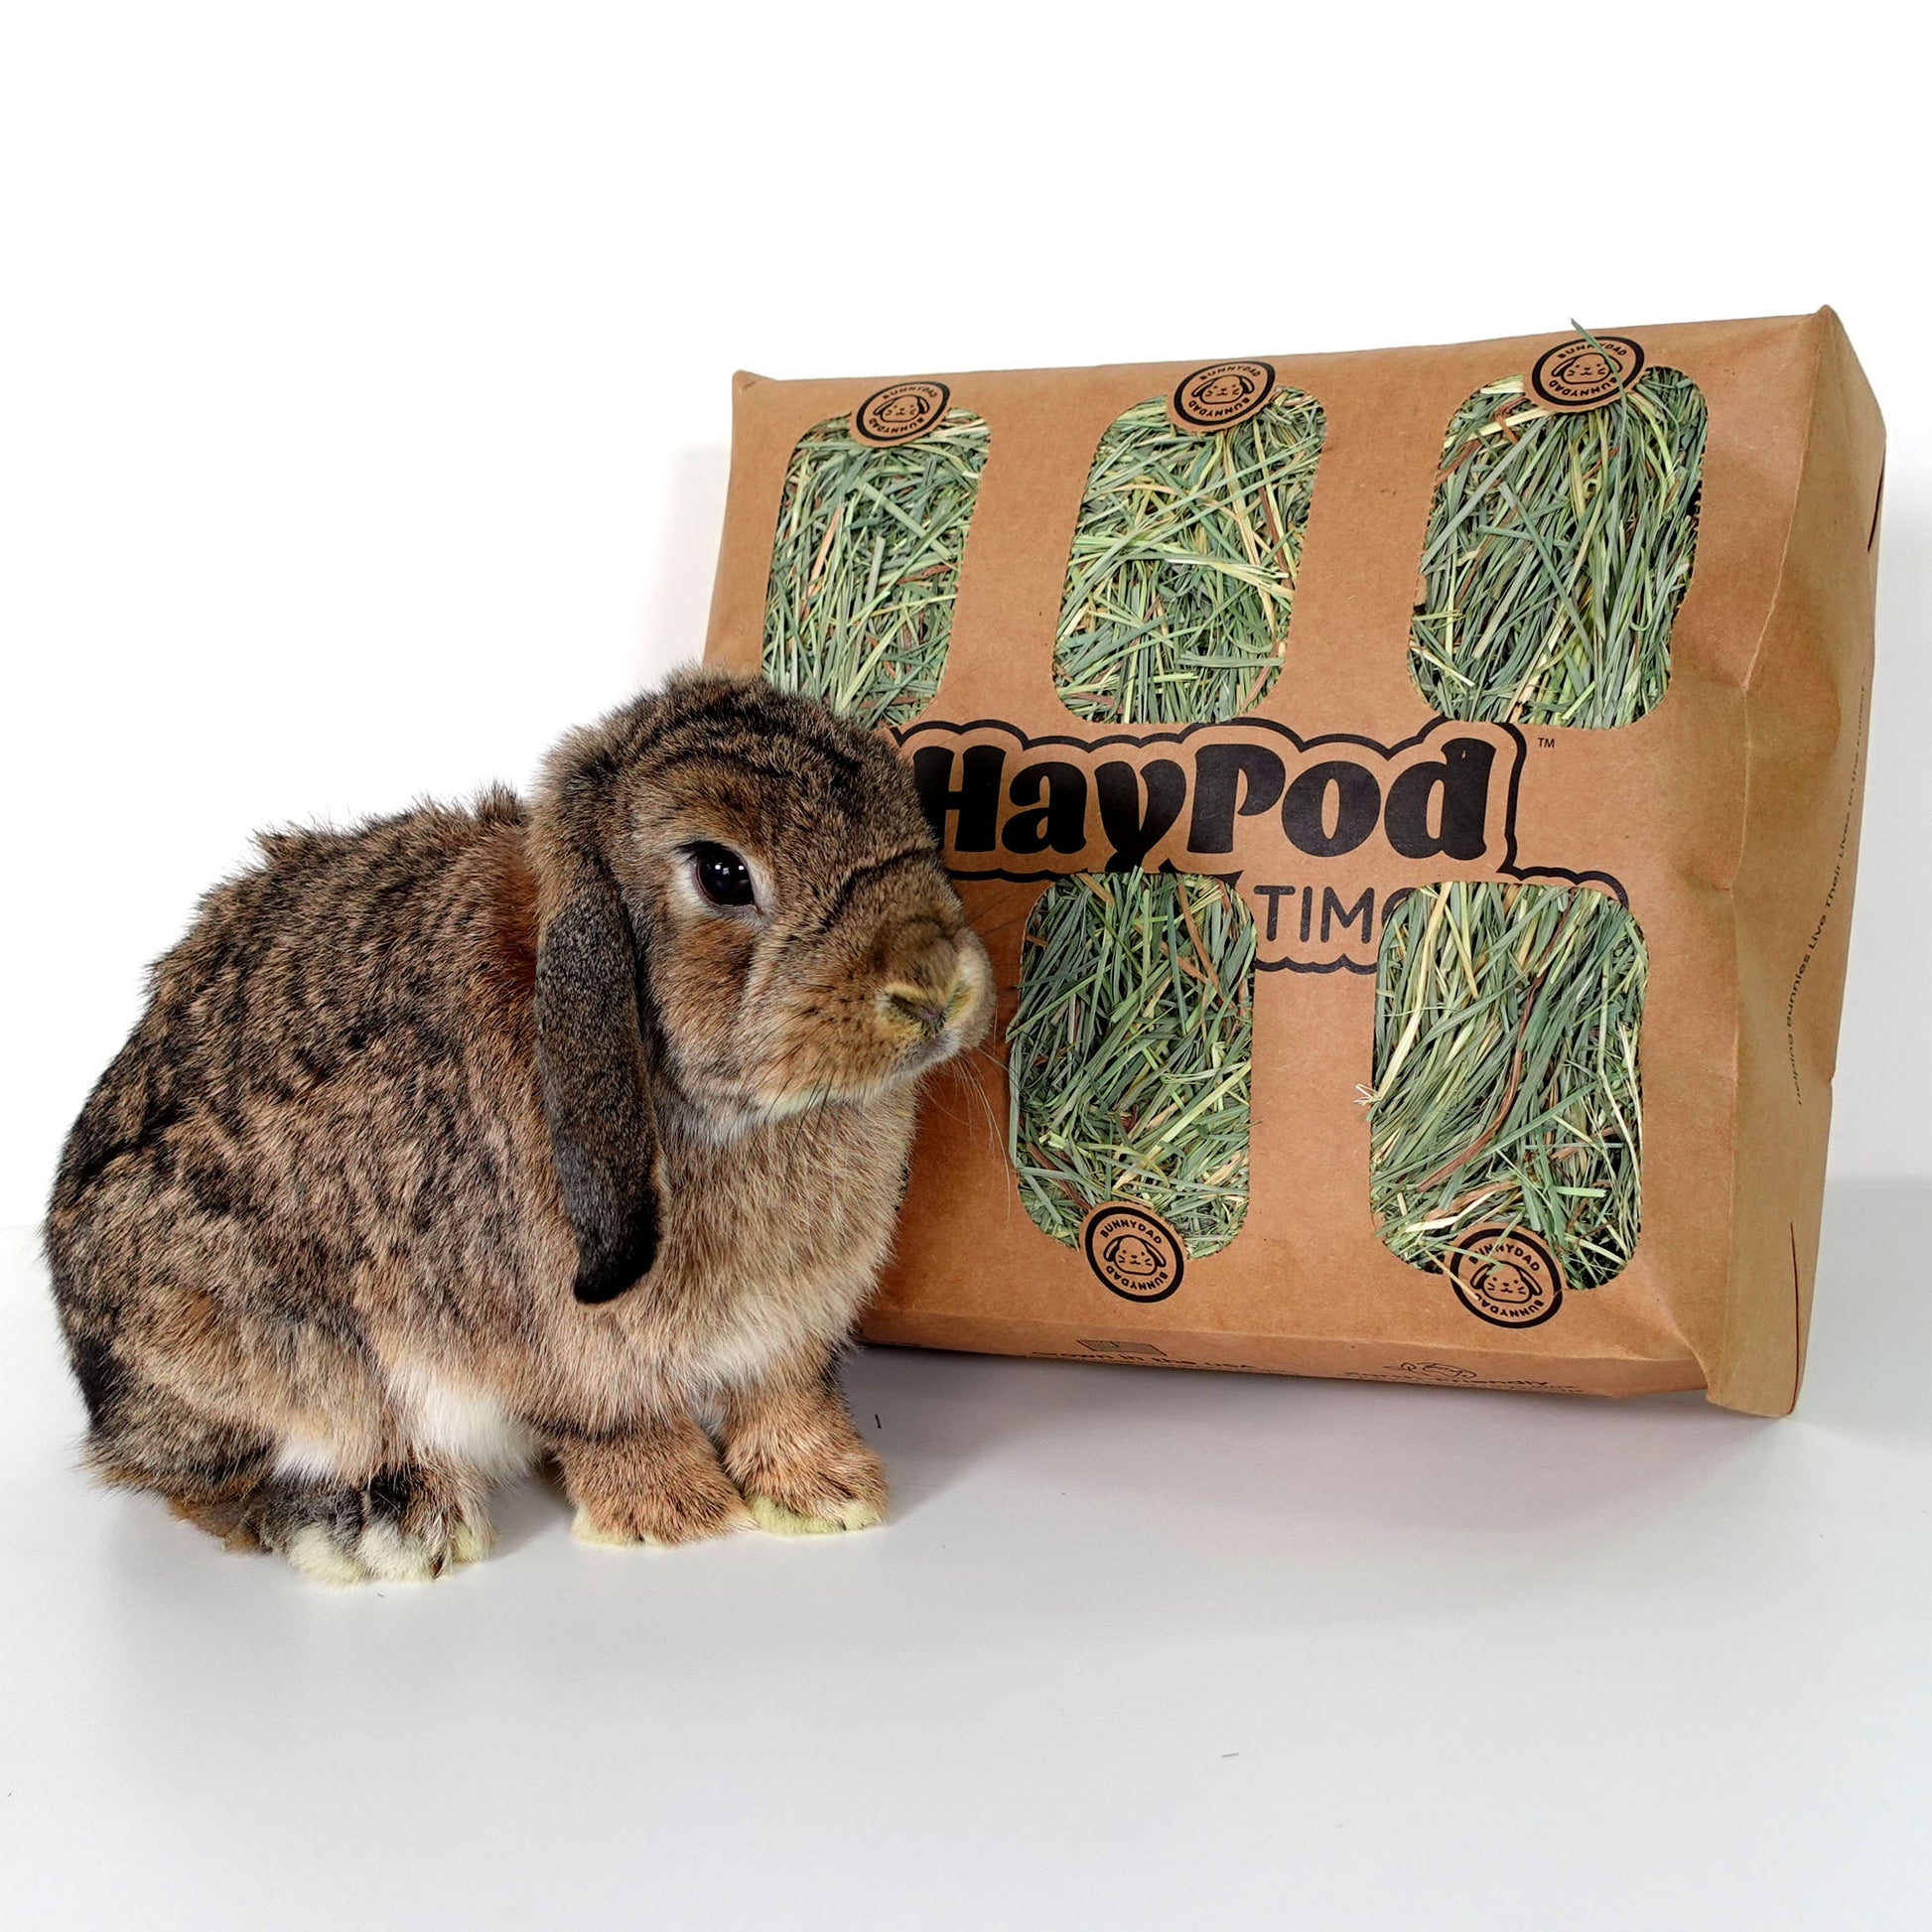 On a white background, there is an opened Timothy HayPod with an adorable dark chestnut brown rabbit in front of it. The HayPod is fully opened, revealing fresh green hay inside. The image captures the charm of the opened HayPod and the presence of a cute rabbit.